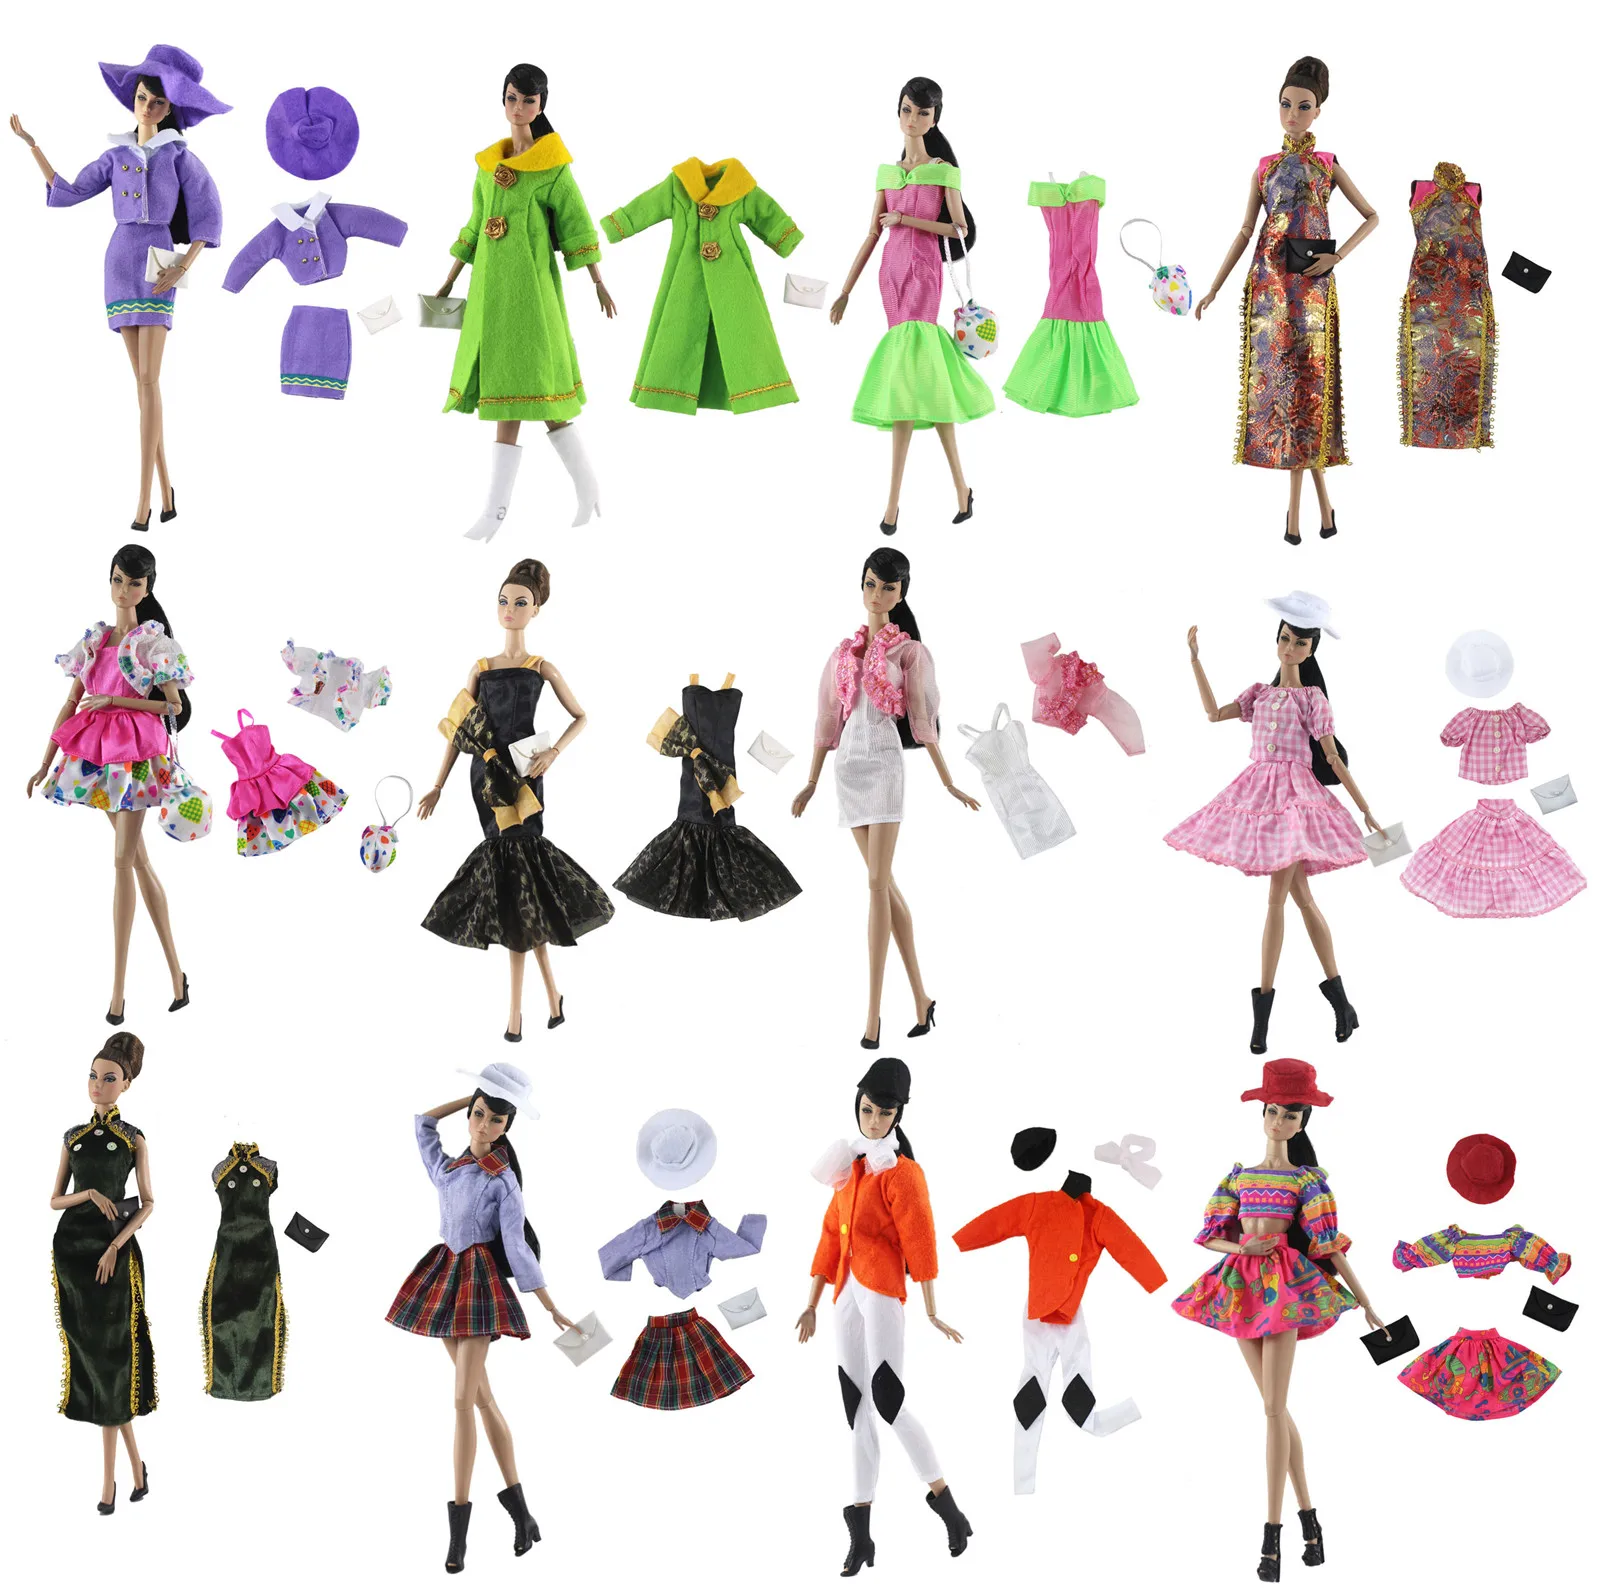 1 Set Doll Clothes 1:6 Scale Dress Outfit for 11.5 inch 30cm Doll Many Style for Choice Gifts for girls doll accessories #01